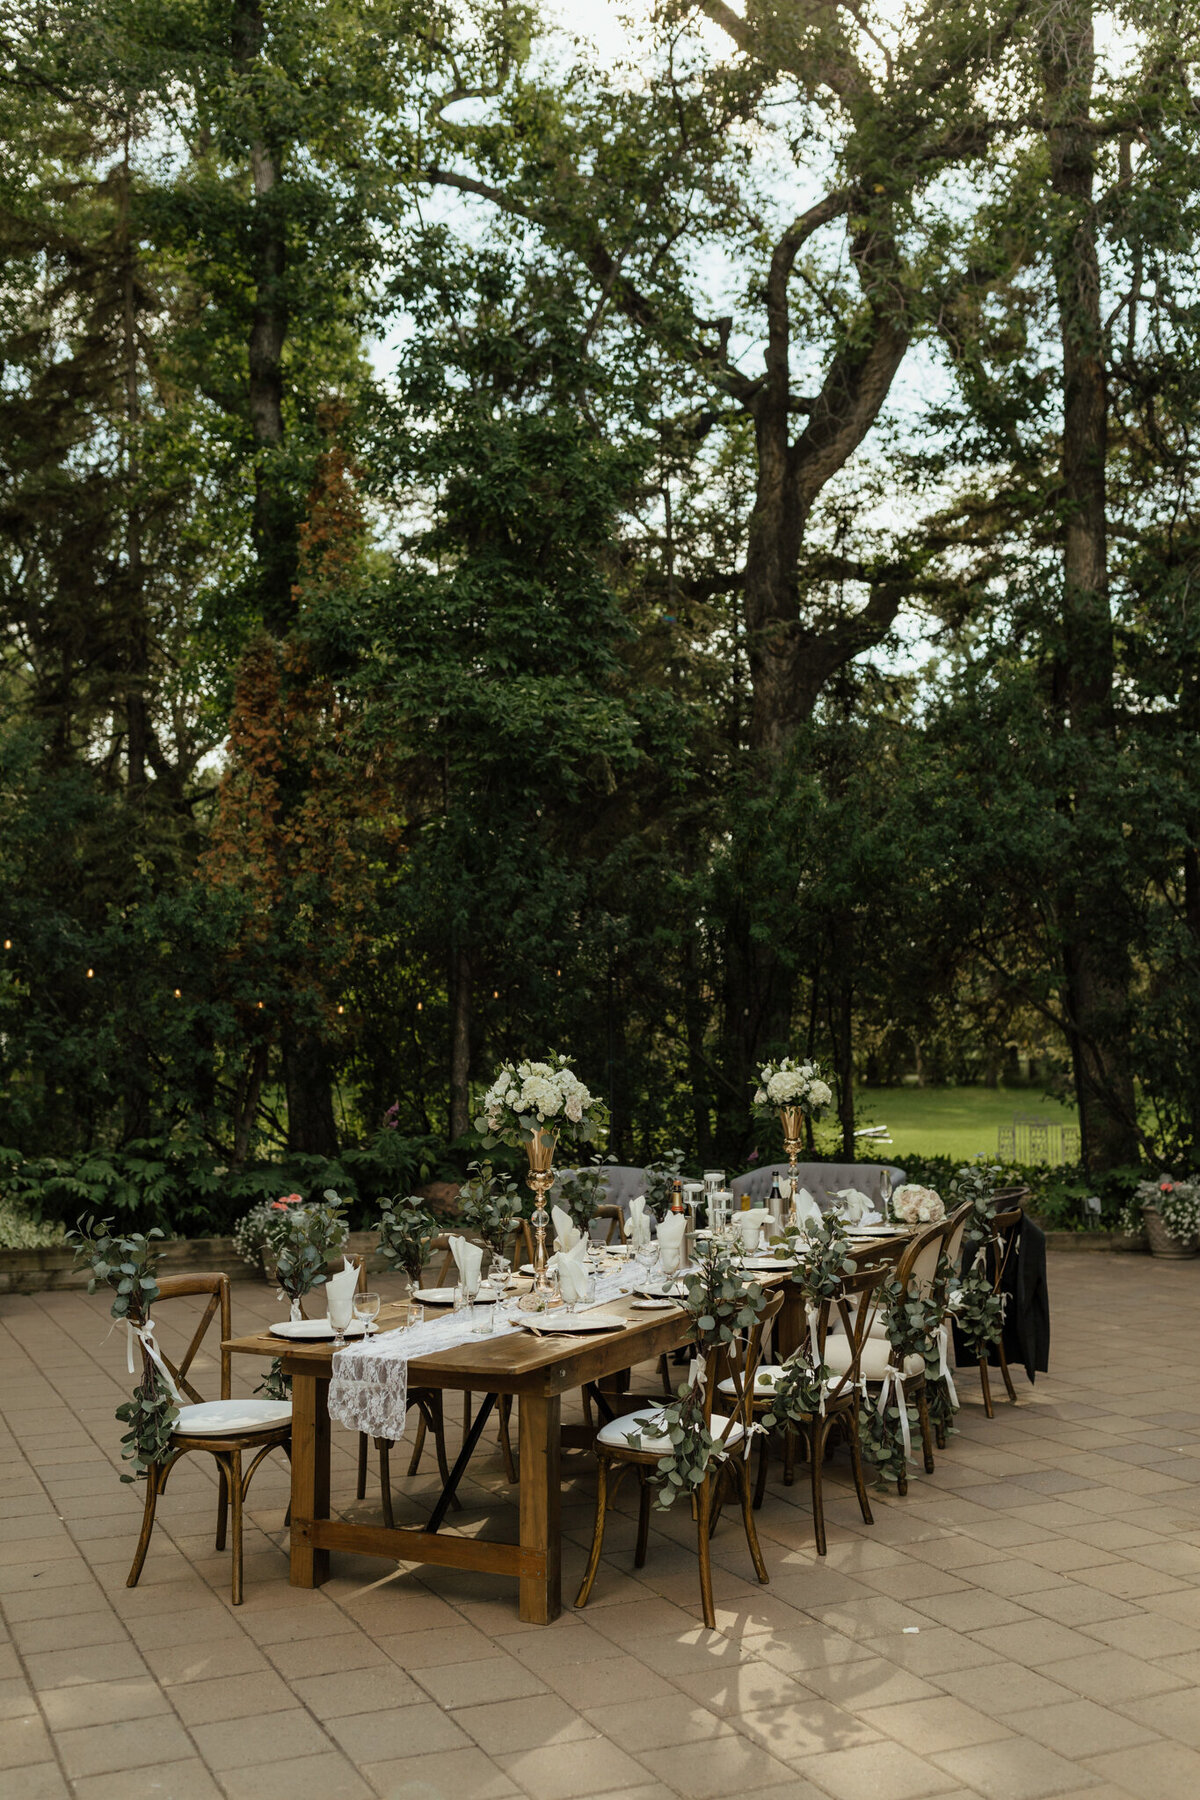 Outdoor intimate reception at The Norland Historic Estate, a classic vintage wedding venue in Lethbridge, AB, featured on the Brontë Bride Vendor Guide.